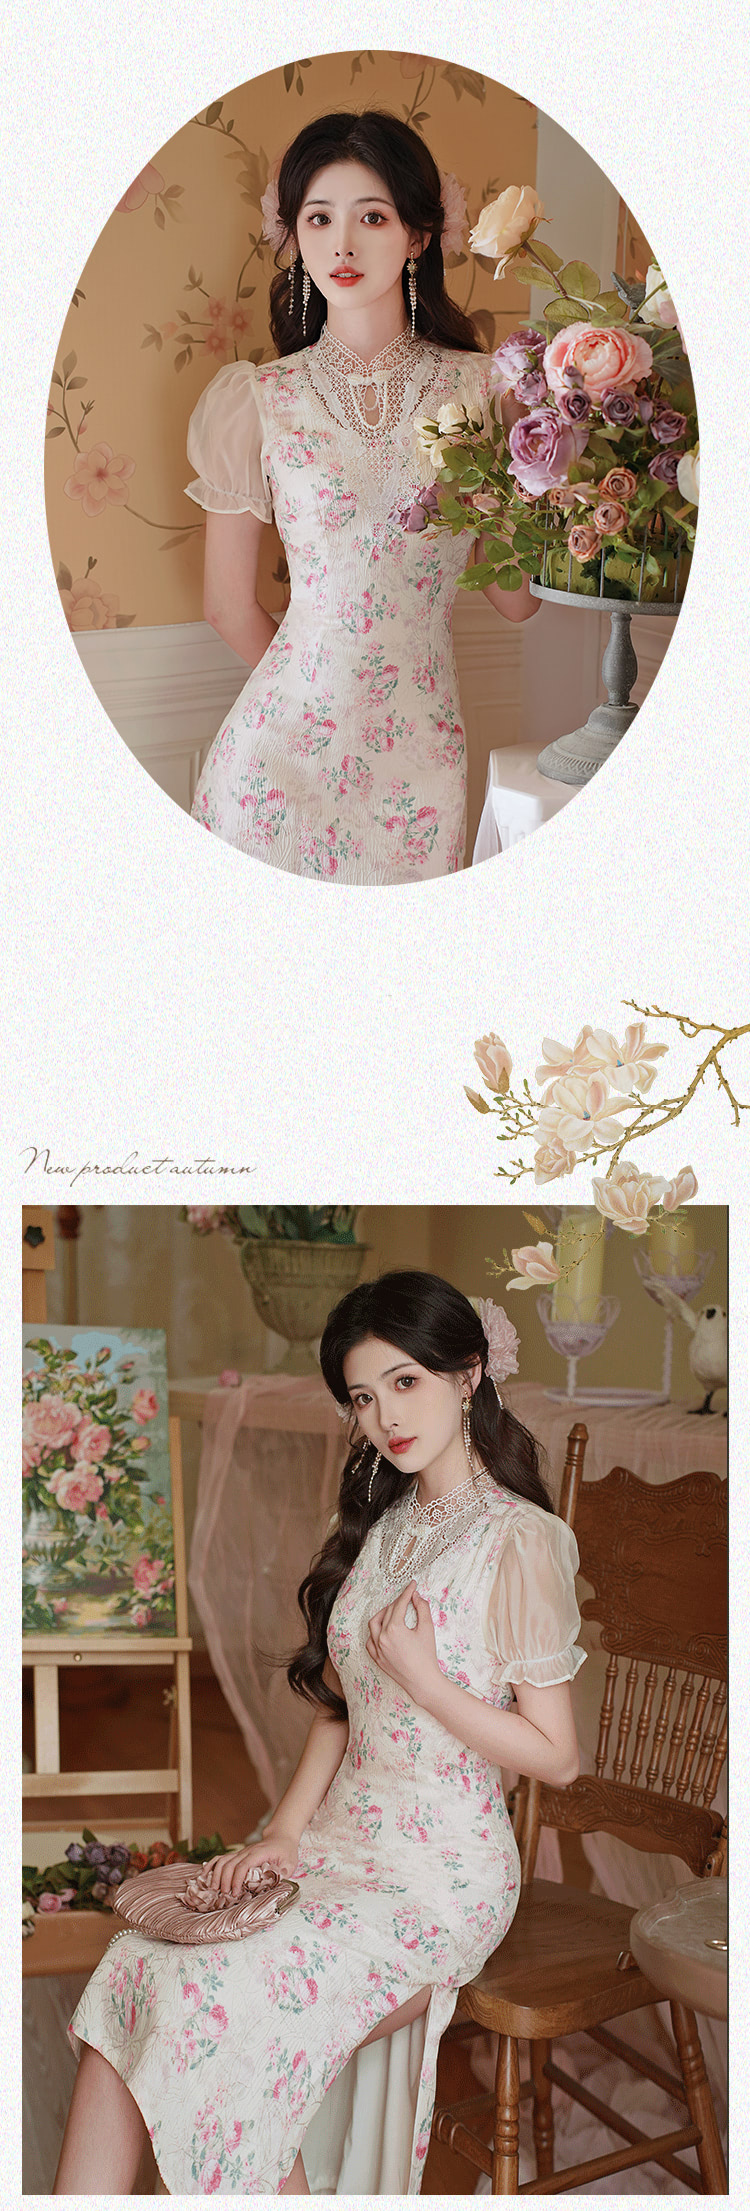 Aesthetic-Baroque-Rose-Floral-Casual-Dress-Daily-Work-Dating-Outfits11